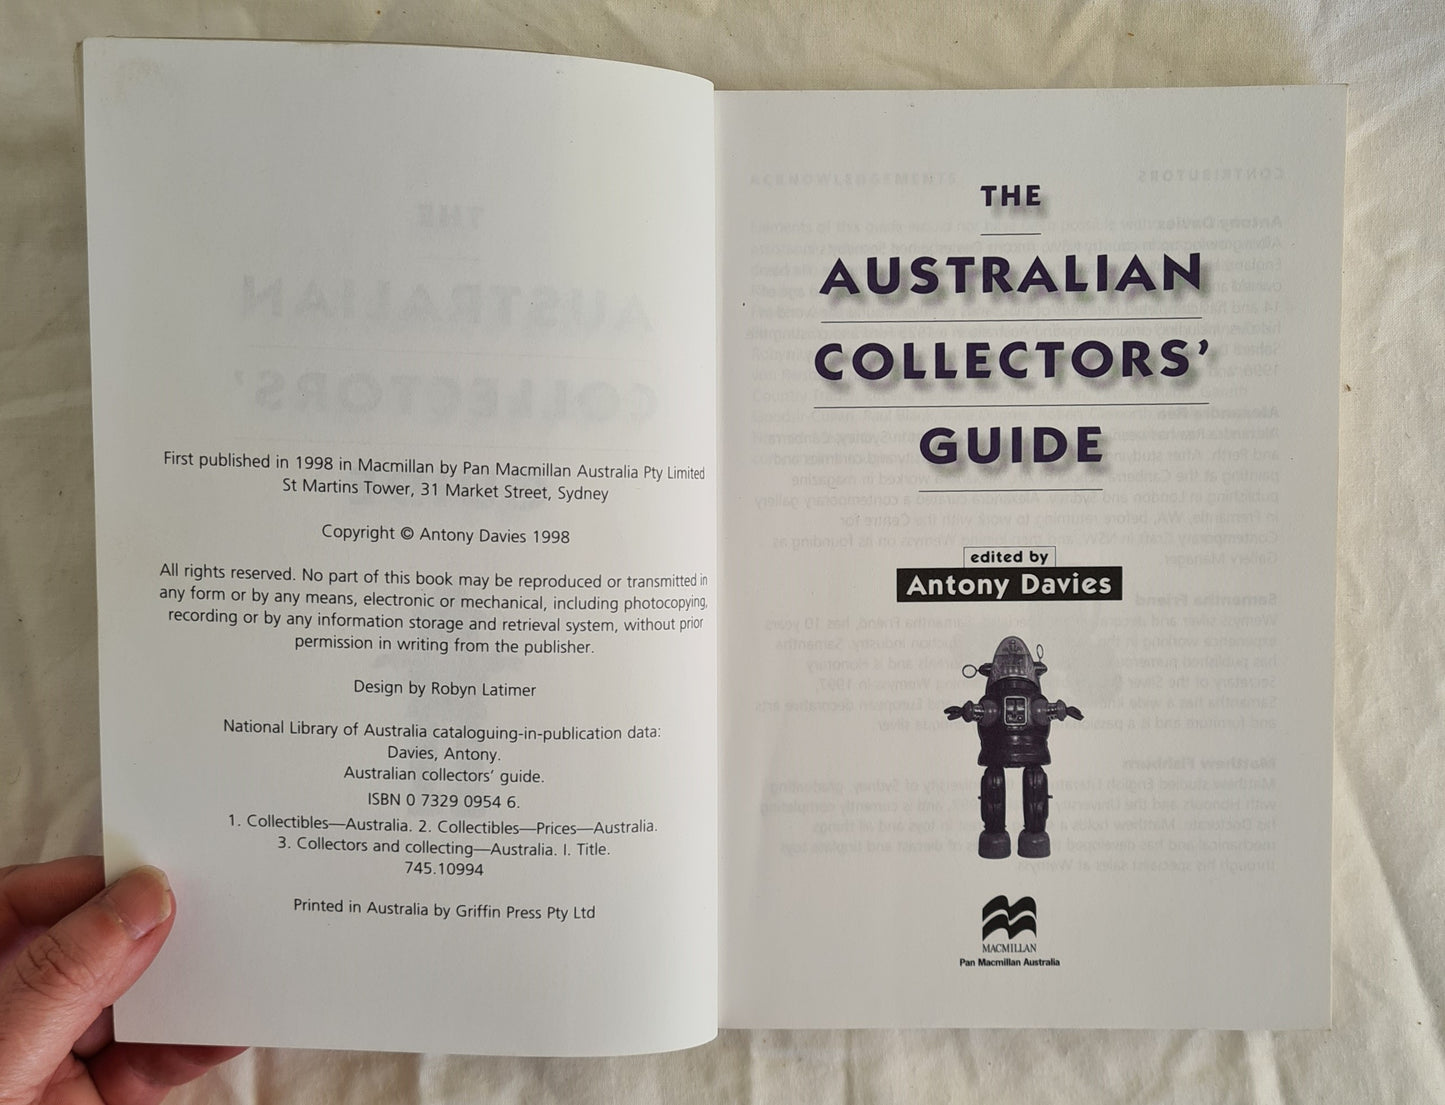 The Australian Collectors’ Guide by Antony Davies